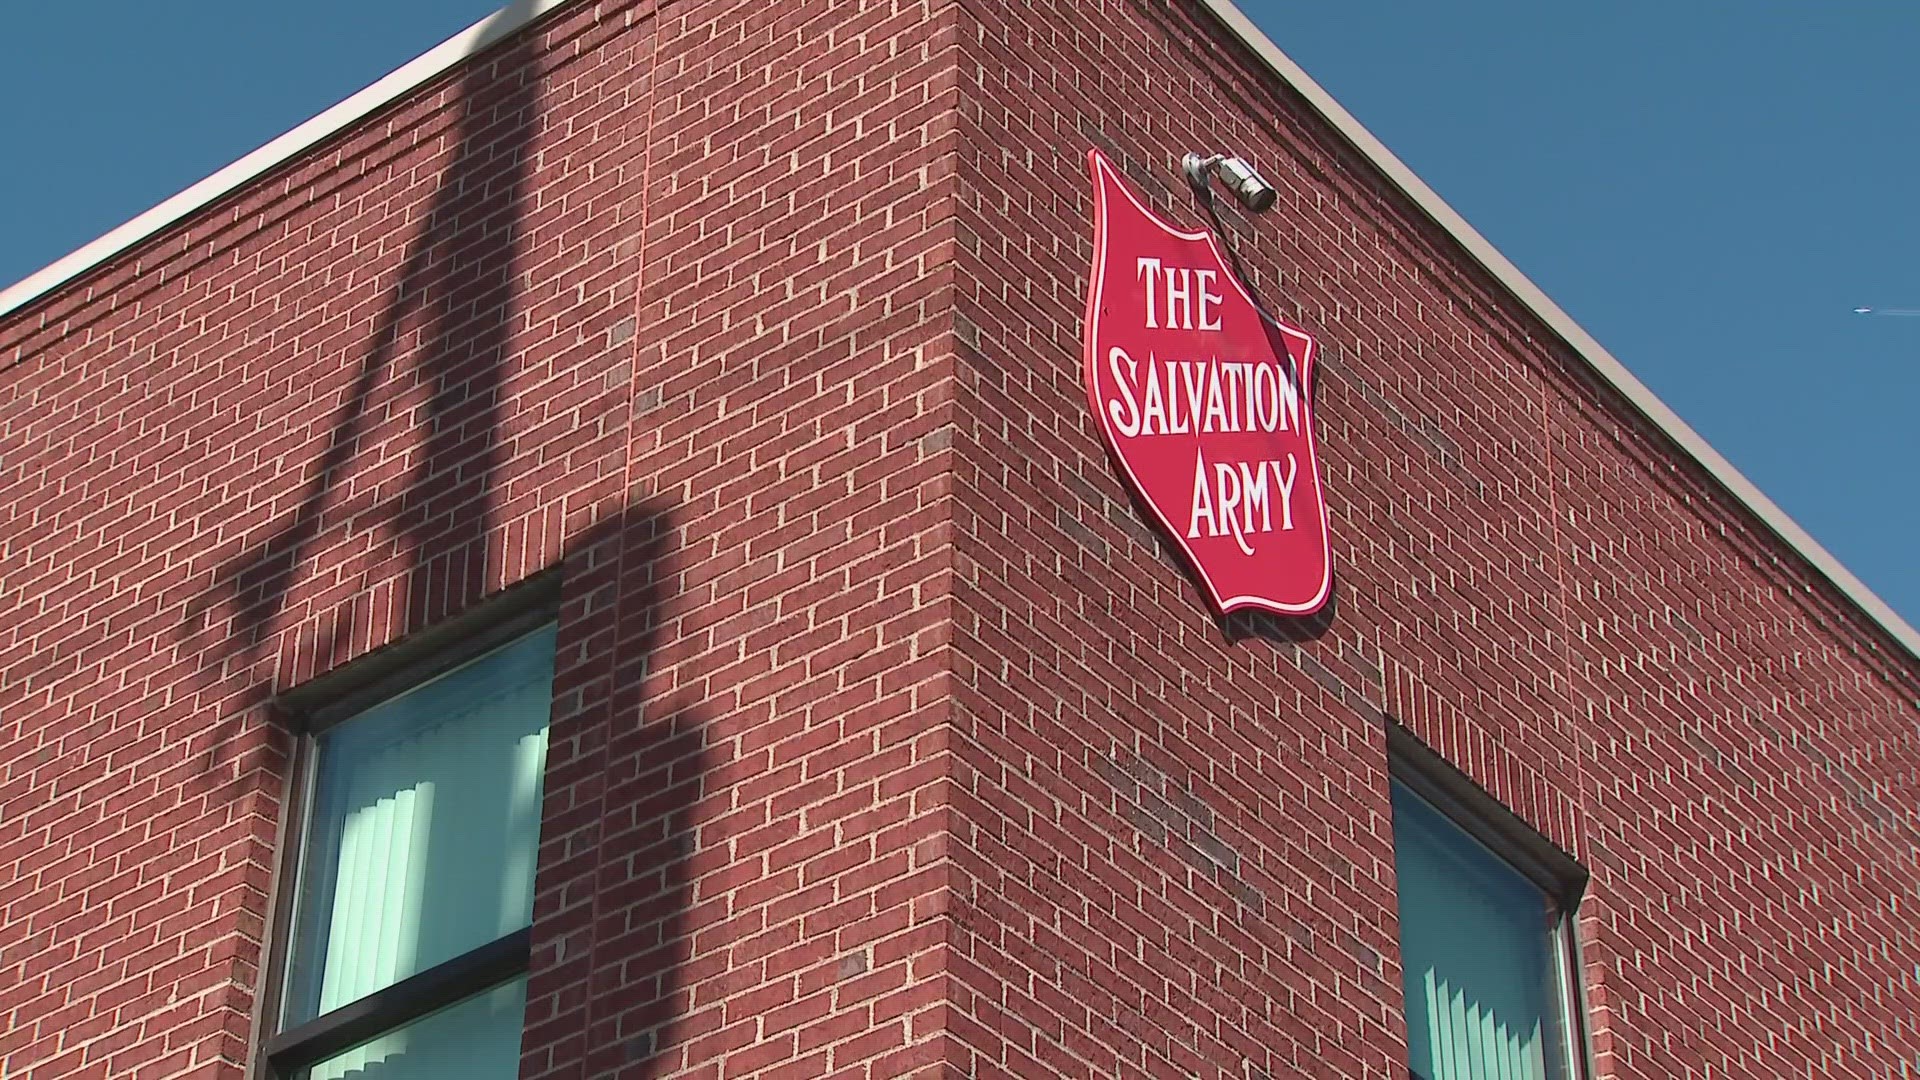 For the Salvation Army, the holiday season is typically the time they receive the most financial support but the need lasts throughout the entire year.